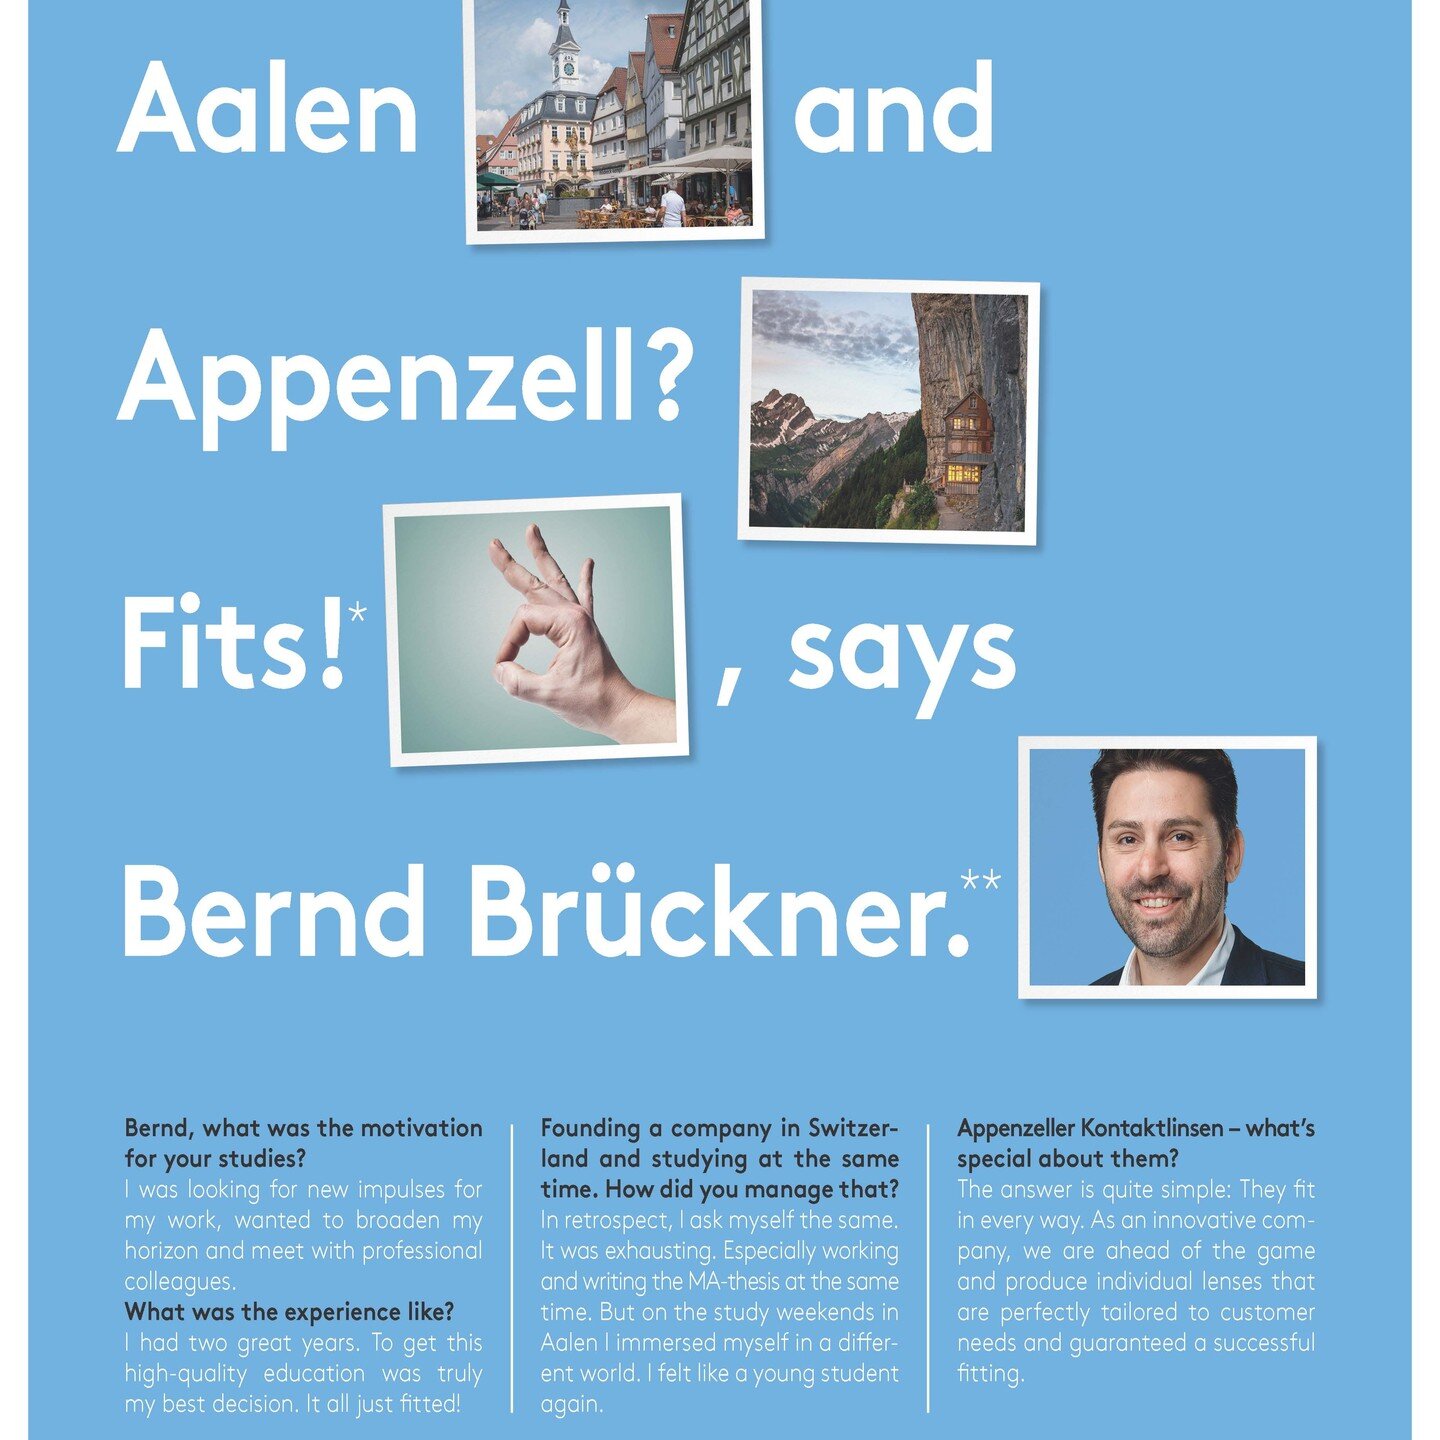 Bernd Br&uuml;ckner did it: #appenzeller_kontaktlinsen_ag
If you want to be among the #elite of #optometrists not only in German-speaking countries, then #apply for the #aalen #master #degree!